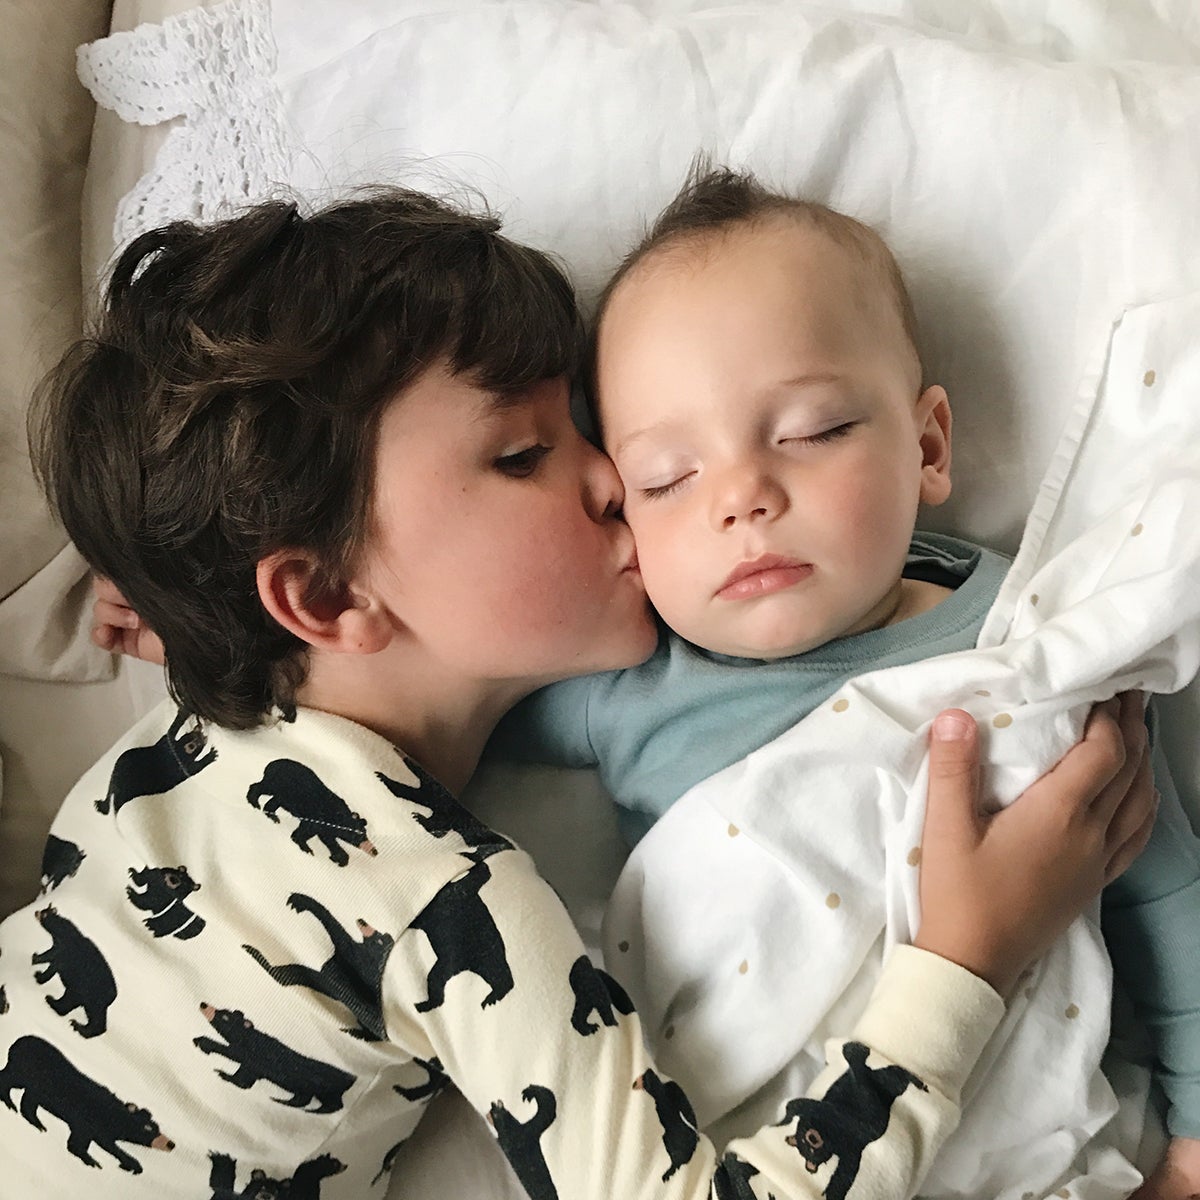 Little boy kissing his sleeping baby brother on the cheek